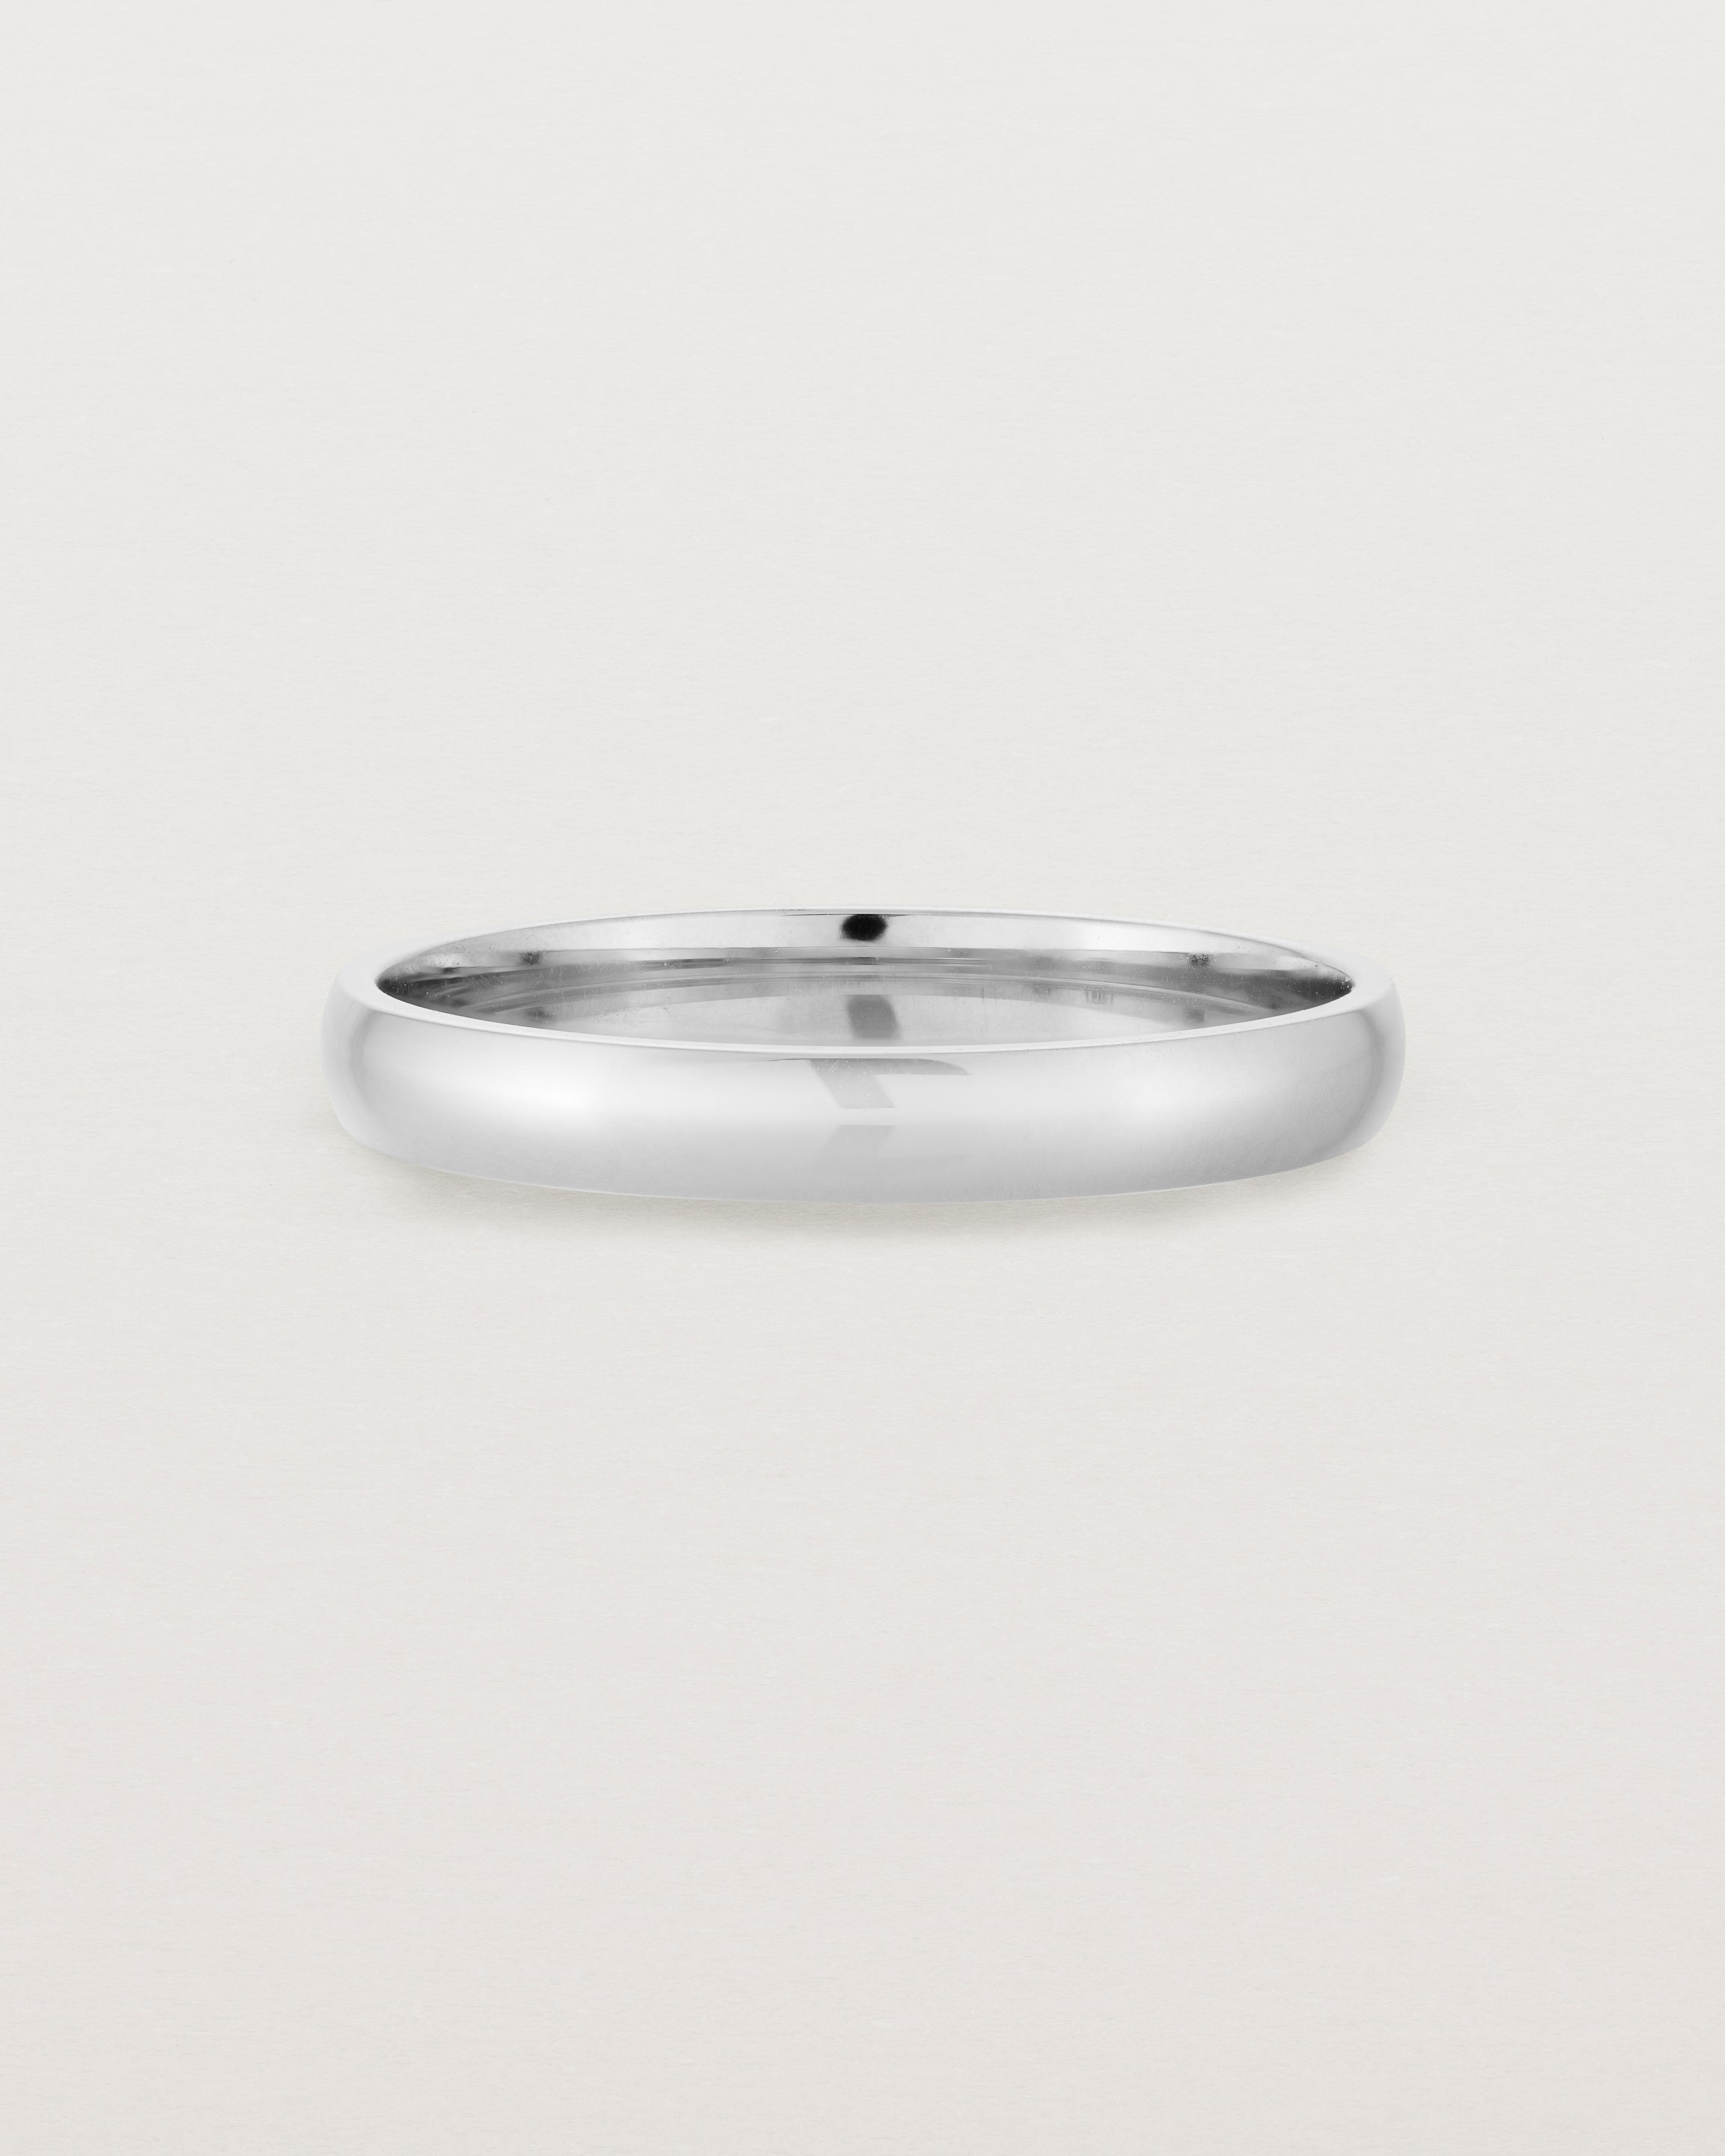 A 3mm fine, classic wedding band in sterling silver